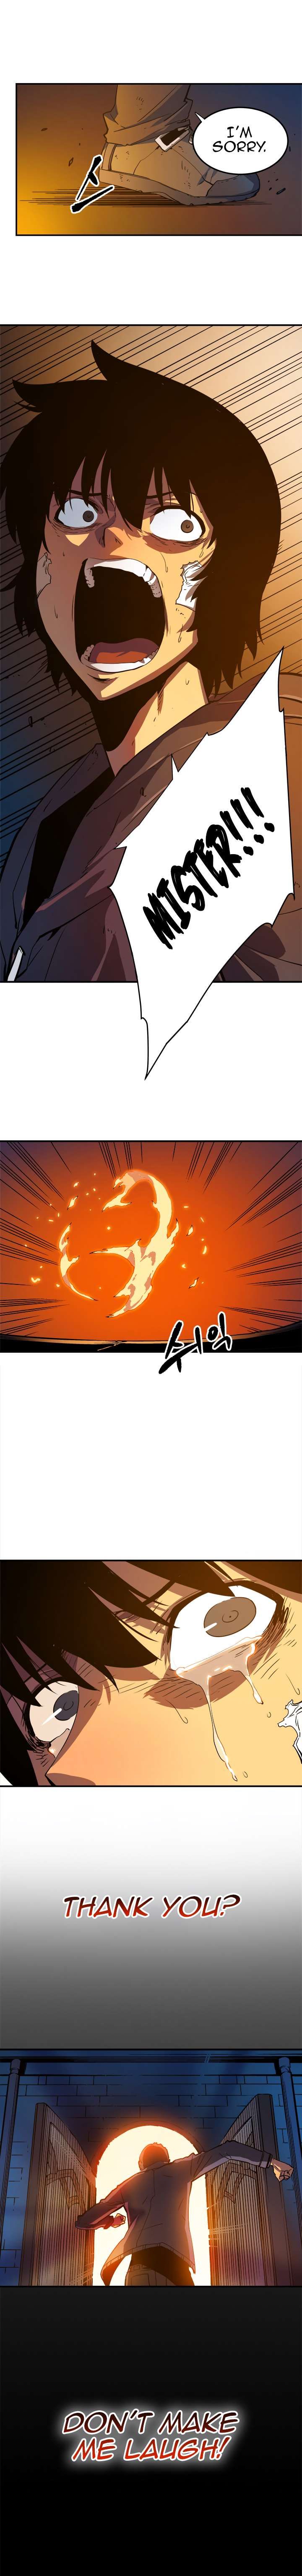 Solo Leveling Chapter 9 page 16